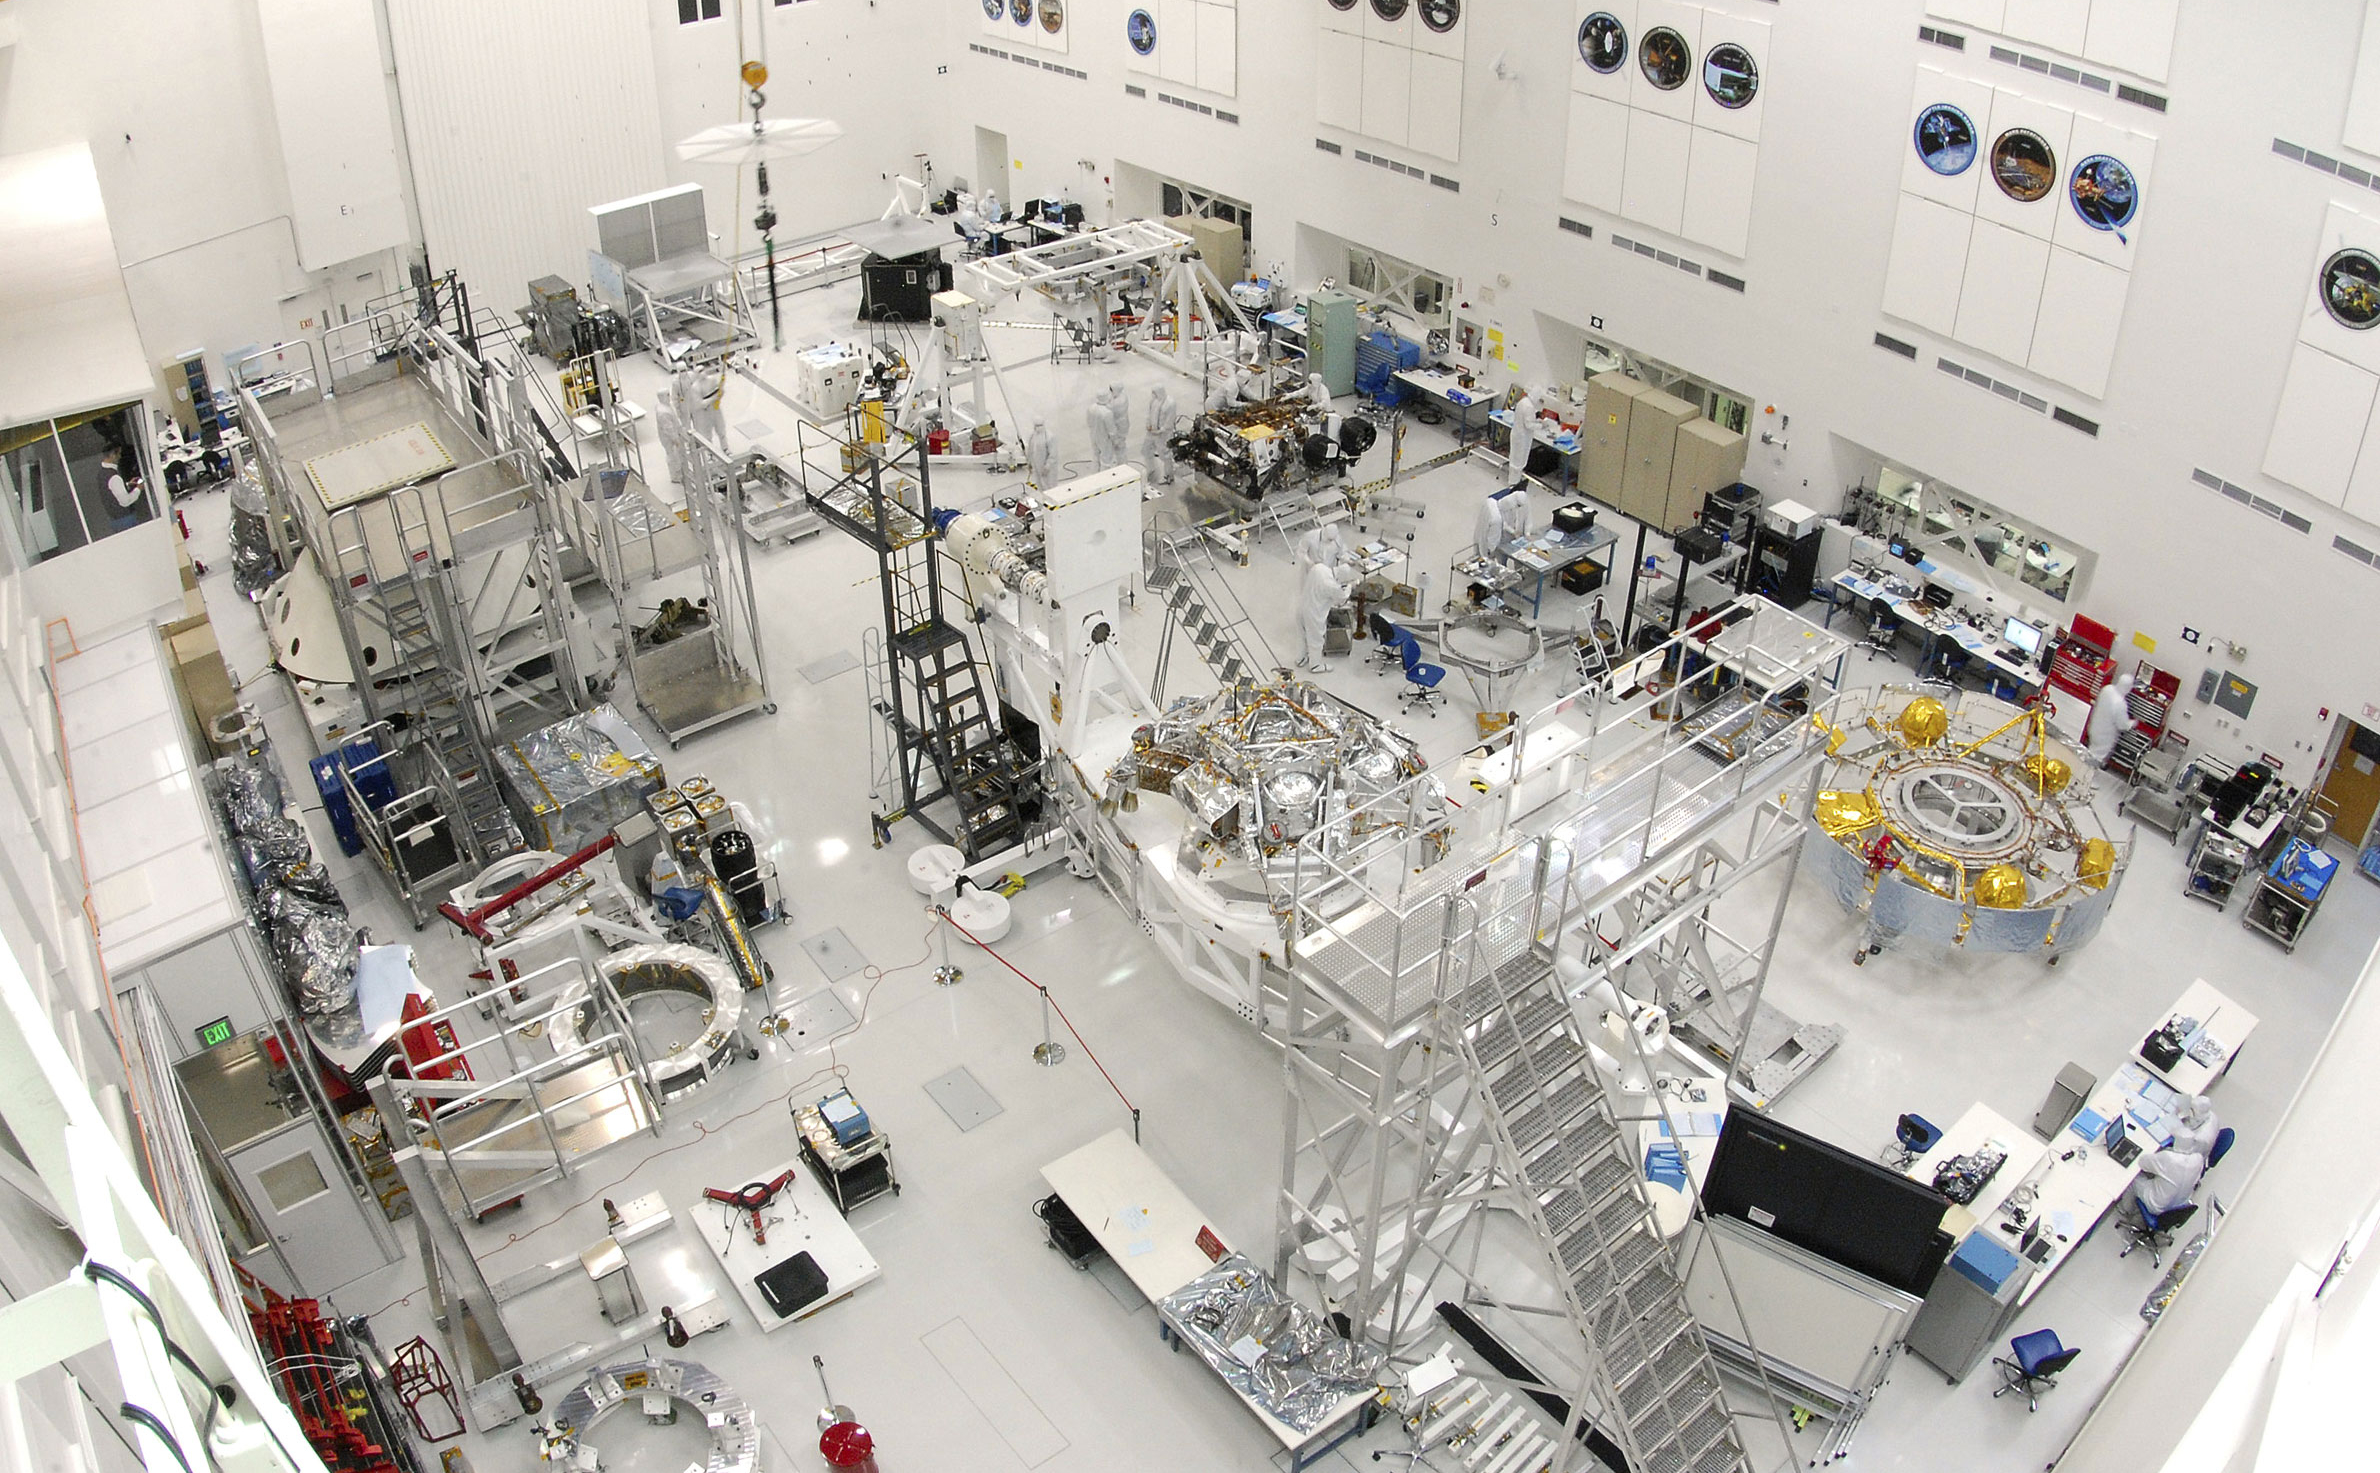 This wide-angle view shows the High Bay 1 cleanroom inside the Spacecraft Assembly Facility at NASA's Jet Propulsion Laboratory, Pasadena, Calif.